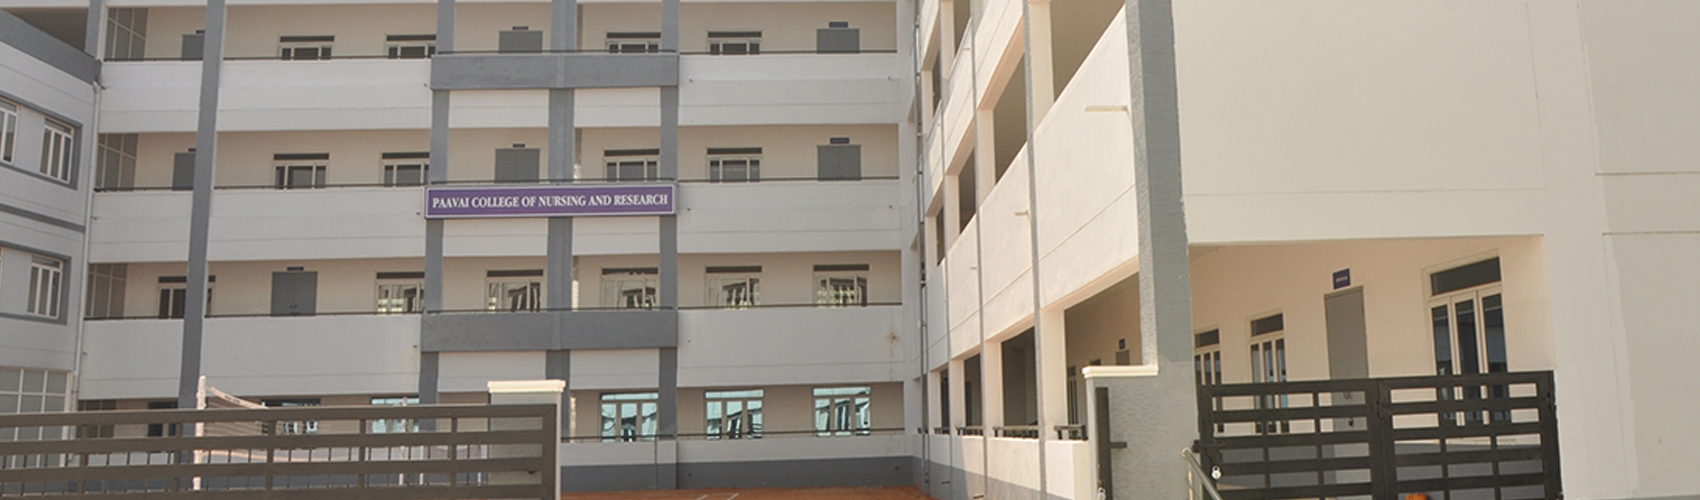 Paavai College of Nursing And Research - Namakkal